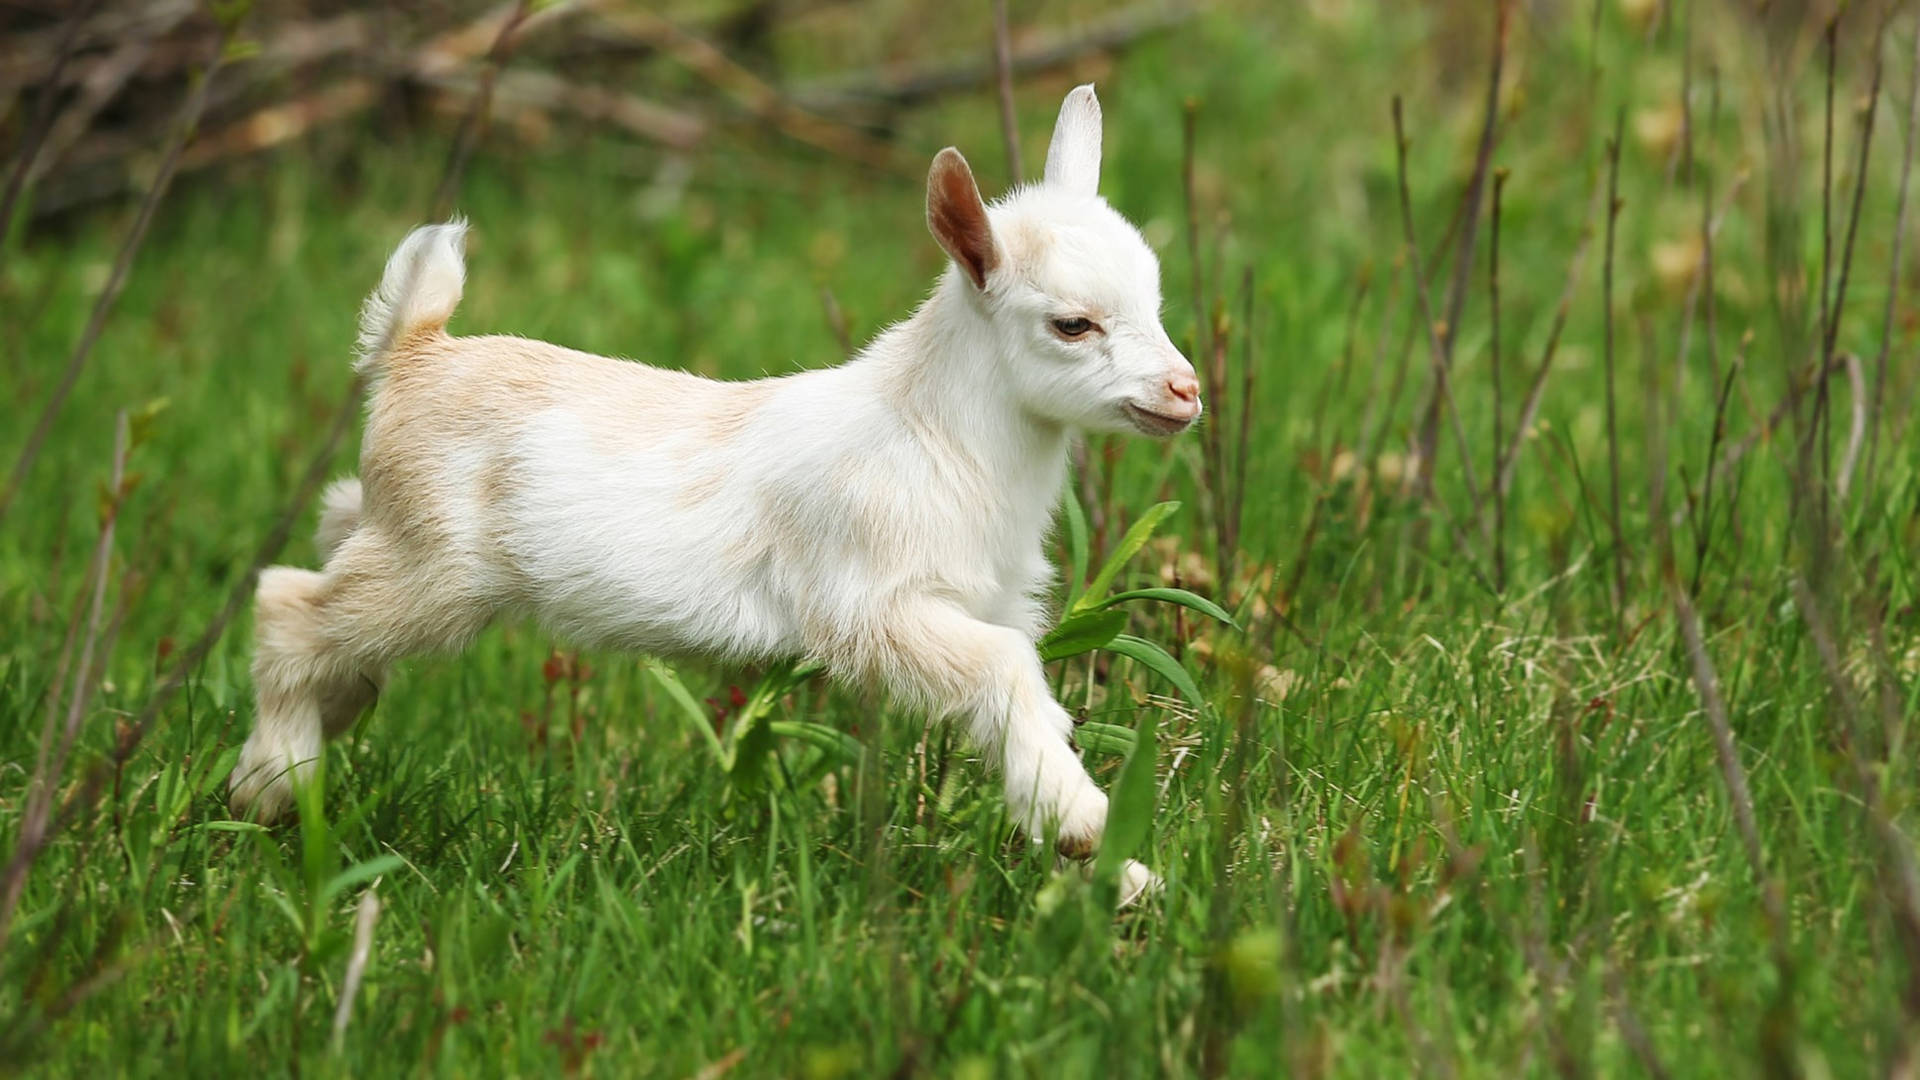 Spännandebabyget Hoppar (assuming This Is A Requested Translation For A Swedish Computer Or Mobile Wallpaper About A Baby Goat) Wallpaper